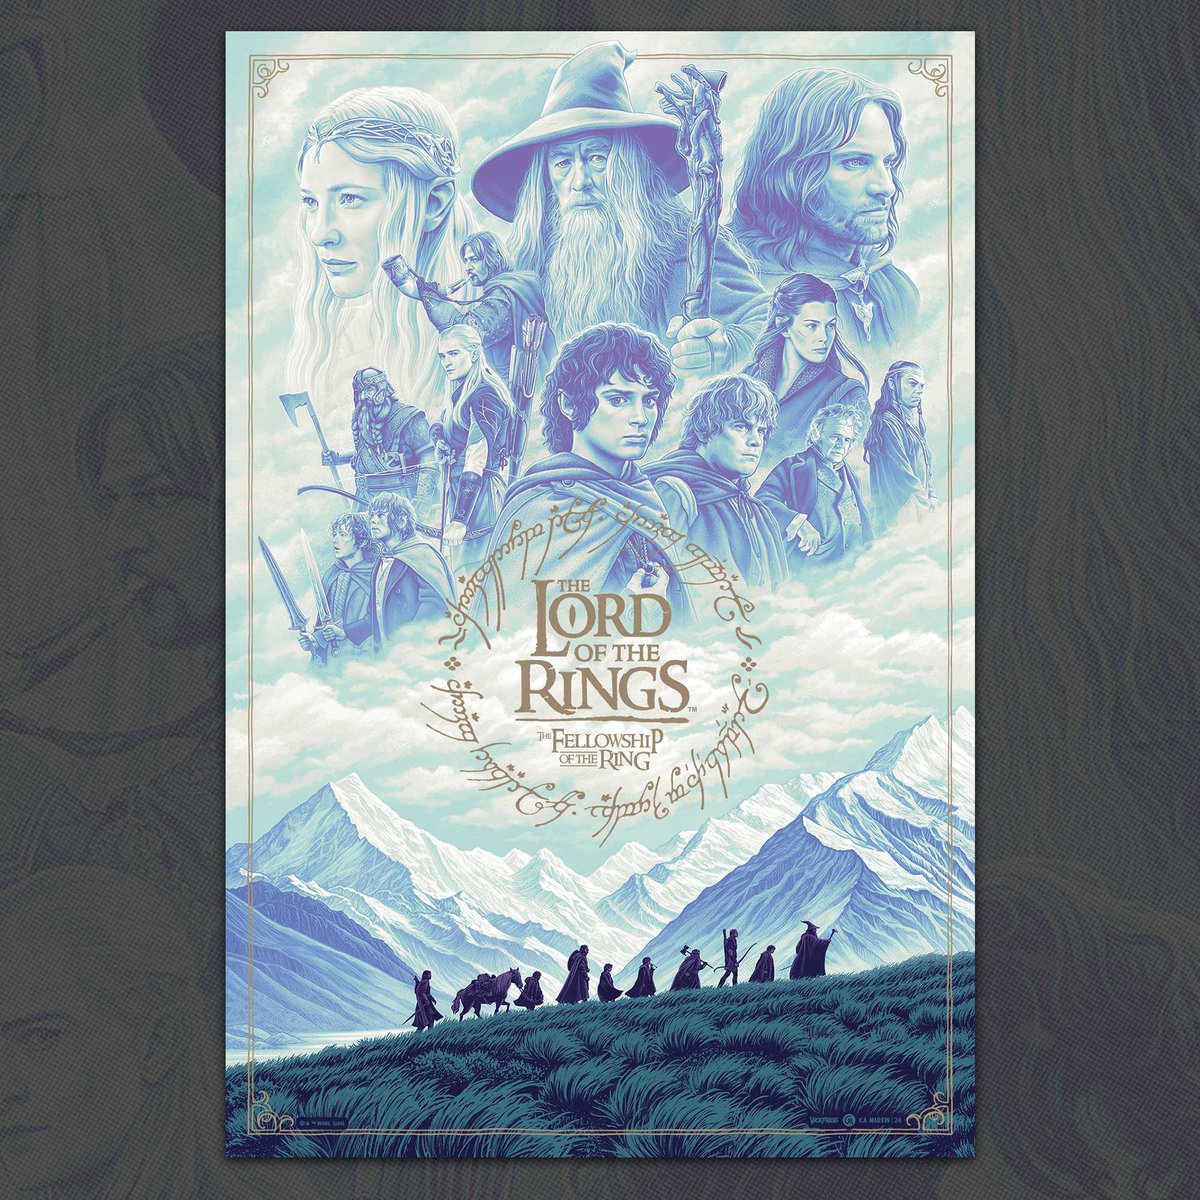 There’s less than 24 hours left to Pick up @camartinart’s Lord Of The Rings: The Fellowship of the Ring officially licensed fine art poster, released in collaboration with @BottleneckNYC! Get yours at vice-press.com/products/the-l…